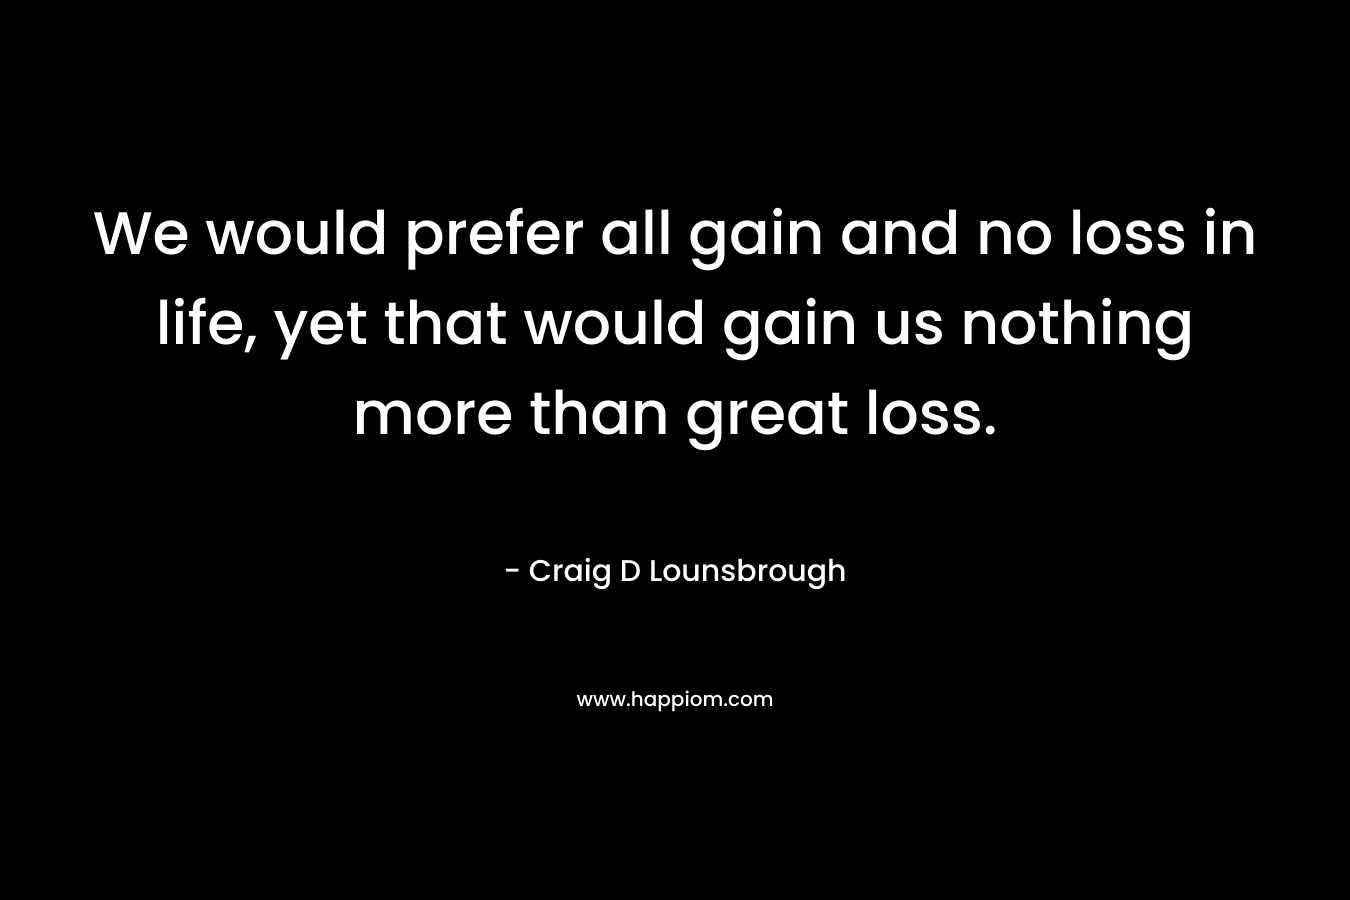 We would prefer all gain and no loss in life, yet that would gain us nothing more than great loss.